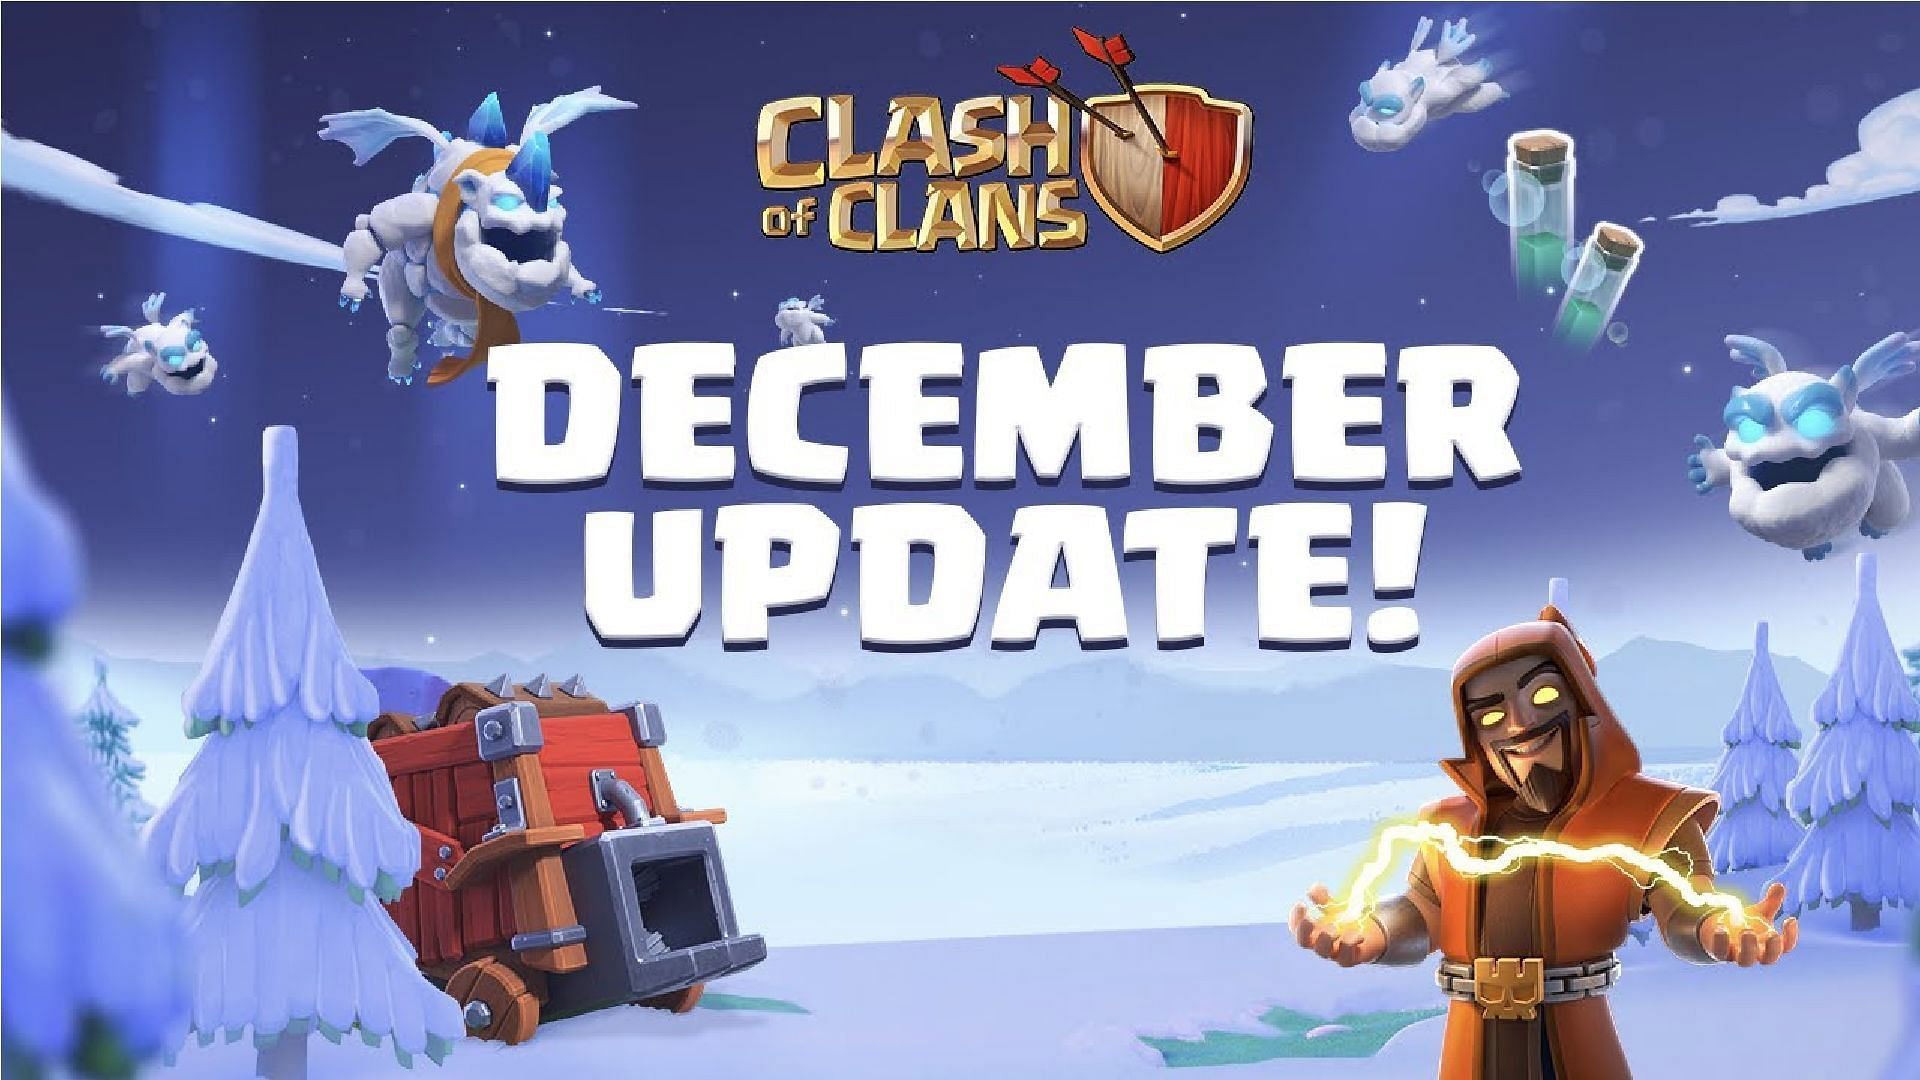 How to watch Clash of Clans December update trailer Timings, TH16